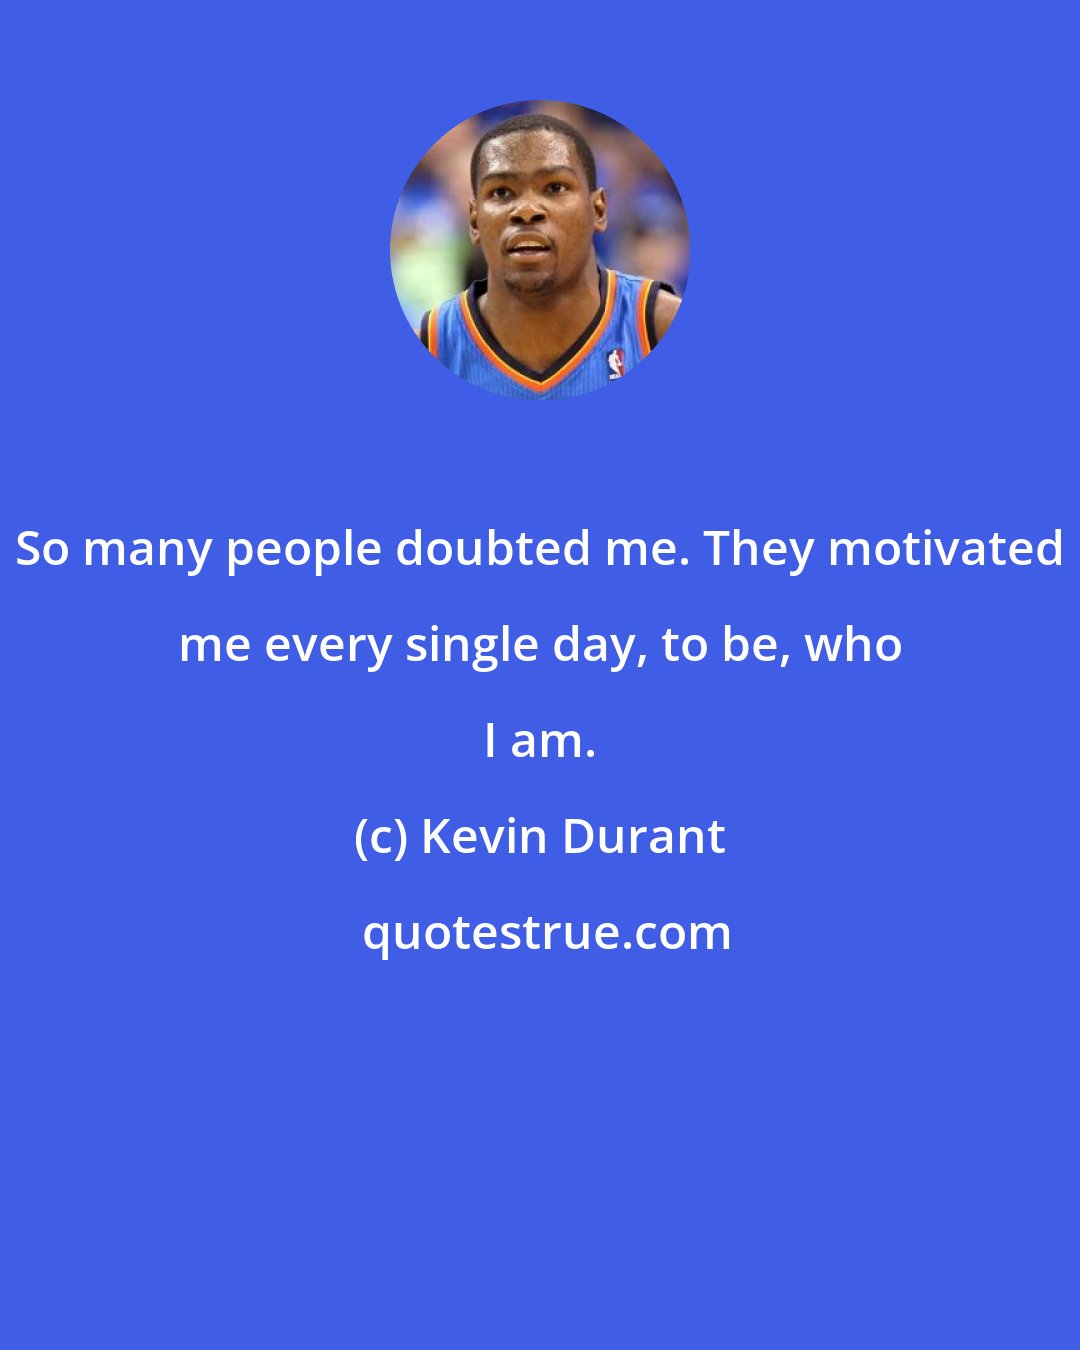 Kevin Durant: So many people doubted me. They motivated me every single day, to be, who I am.